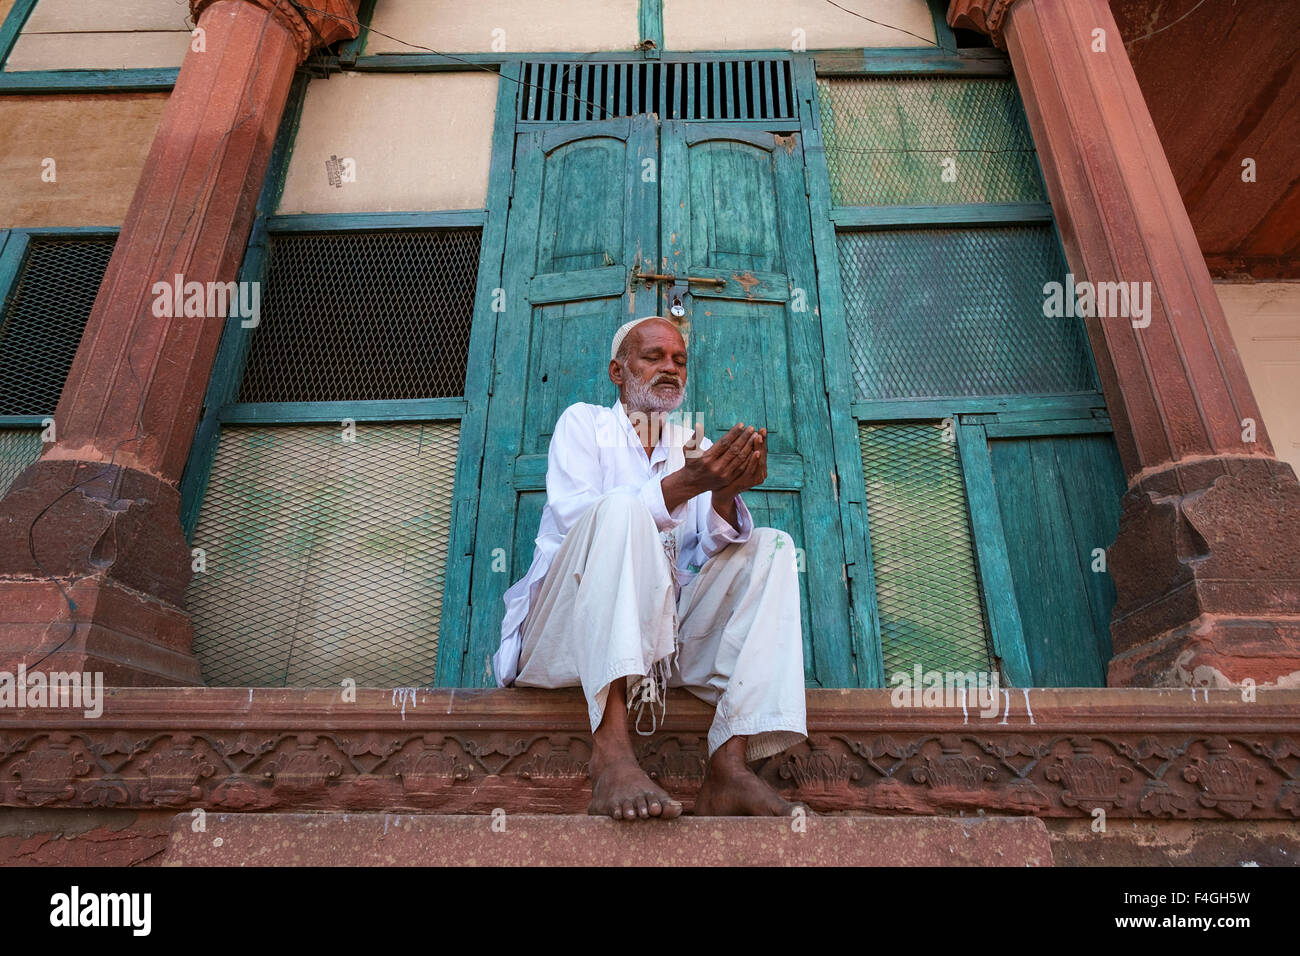 Gate keeper at Jamma Mosque Agra. The mosque is very popular among tourist after Taj Mahal. Stock Photo